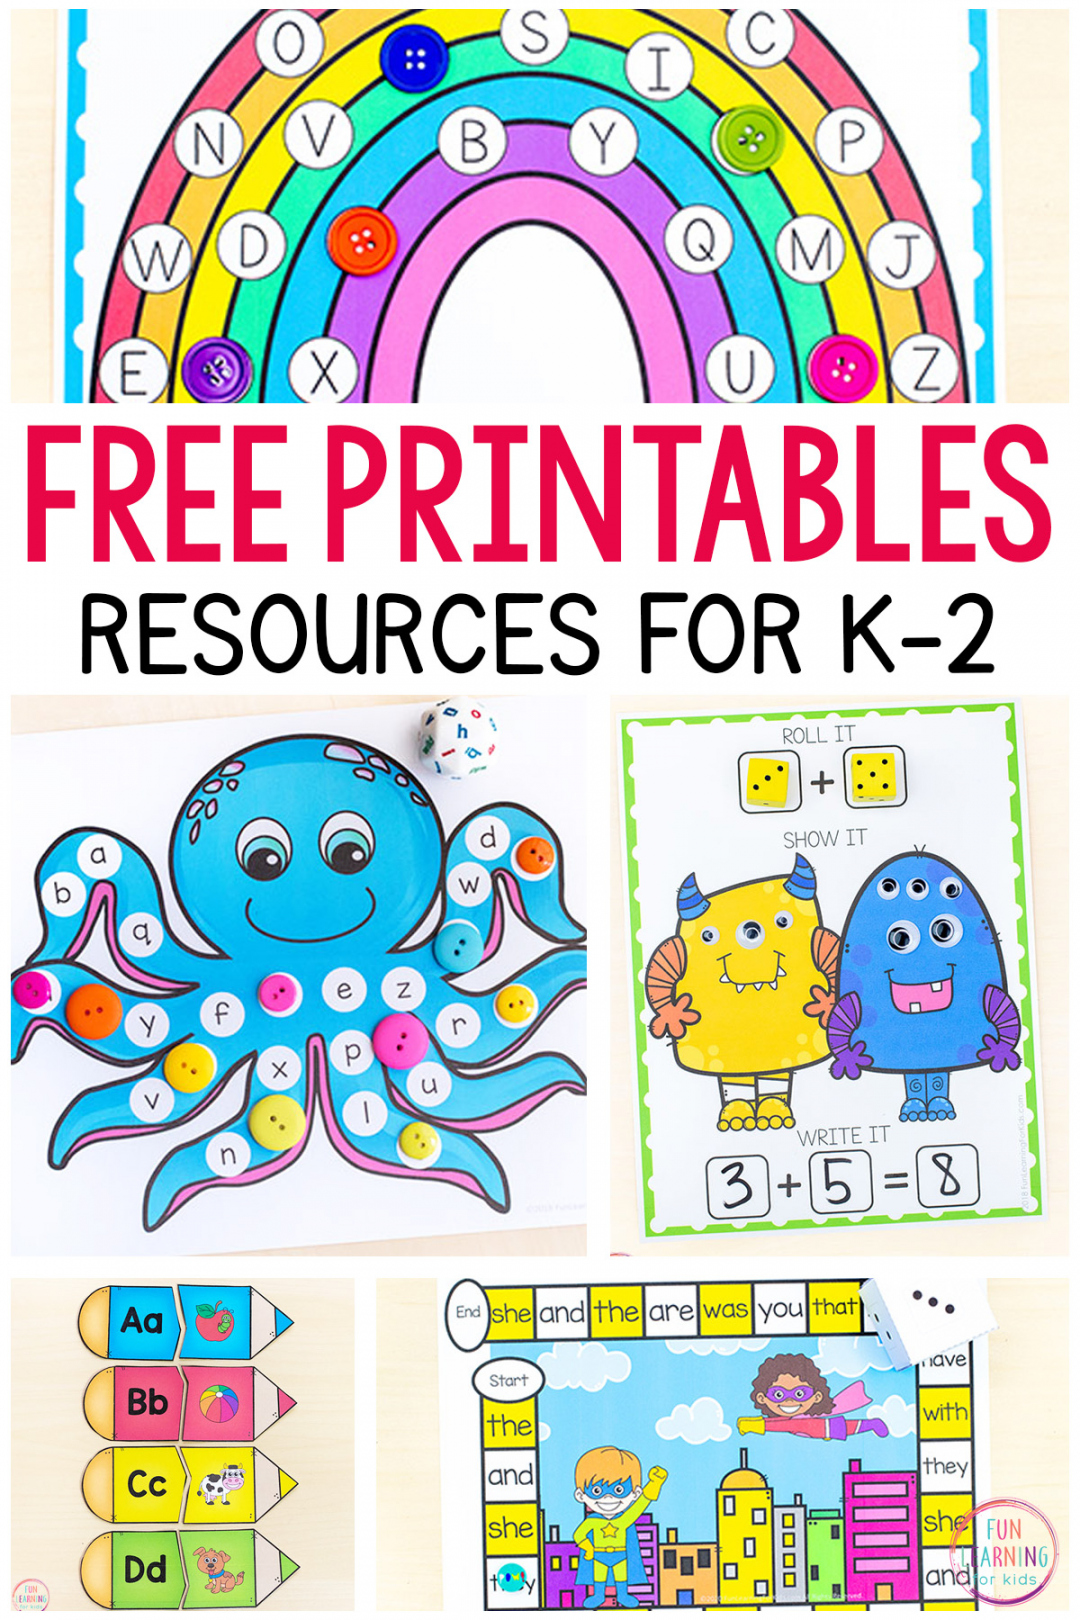 + Free Printables and Activities for Kids